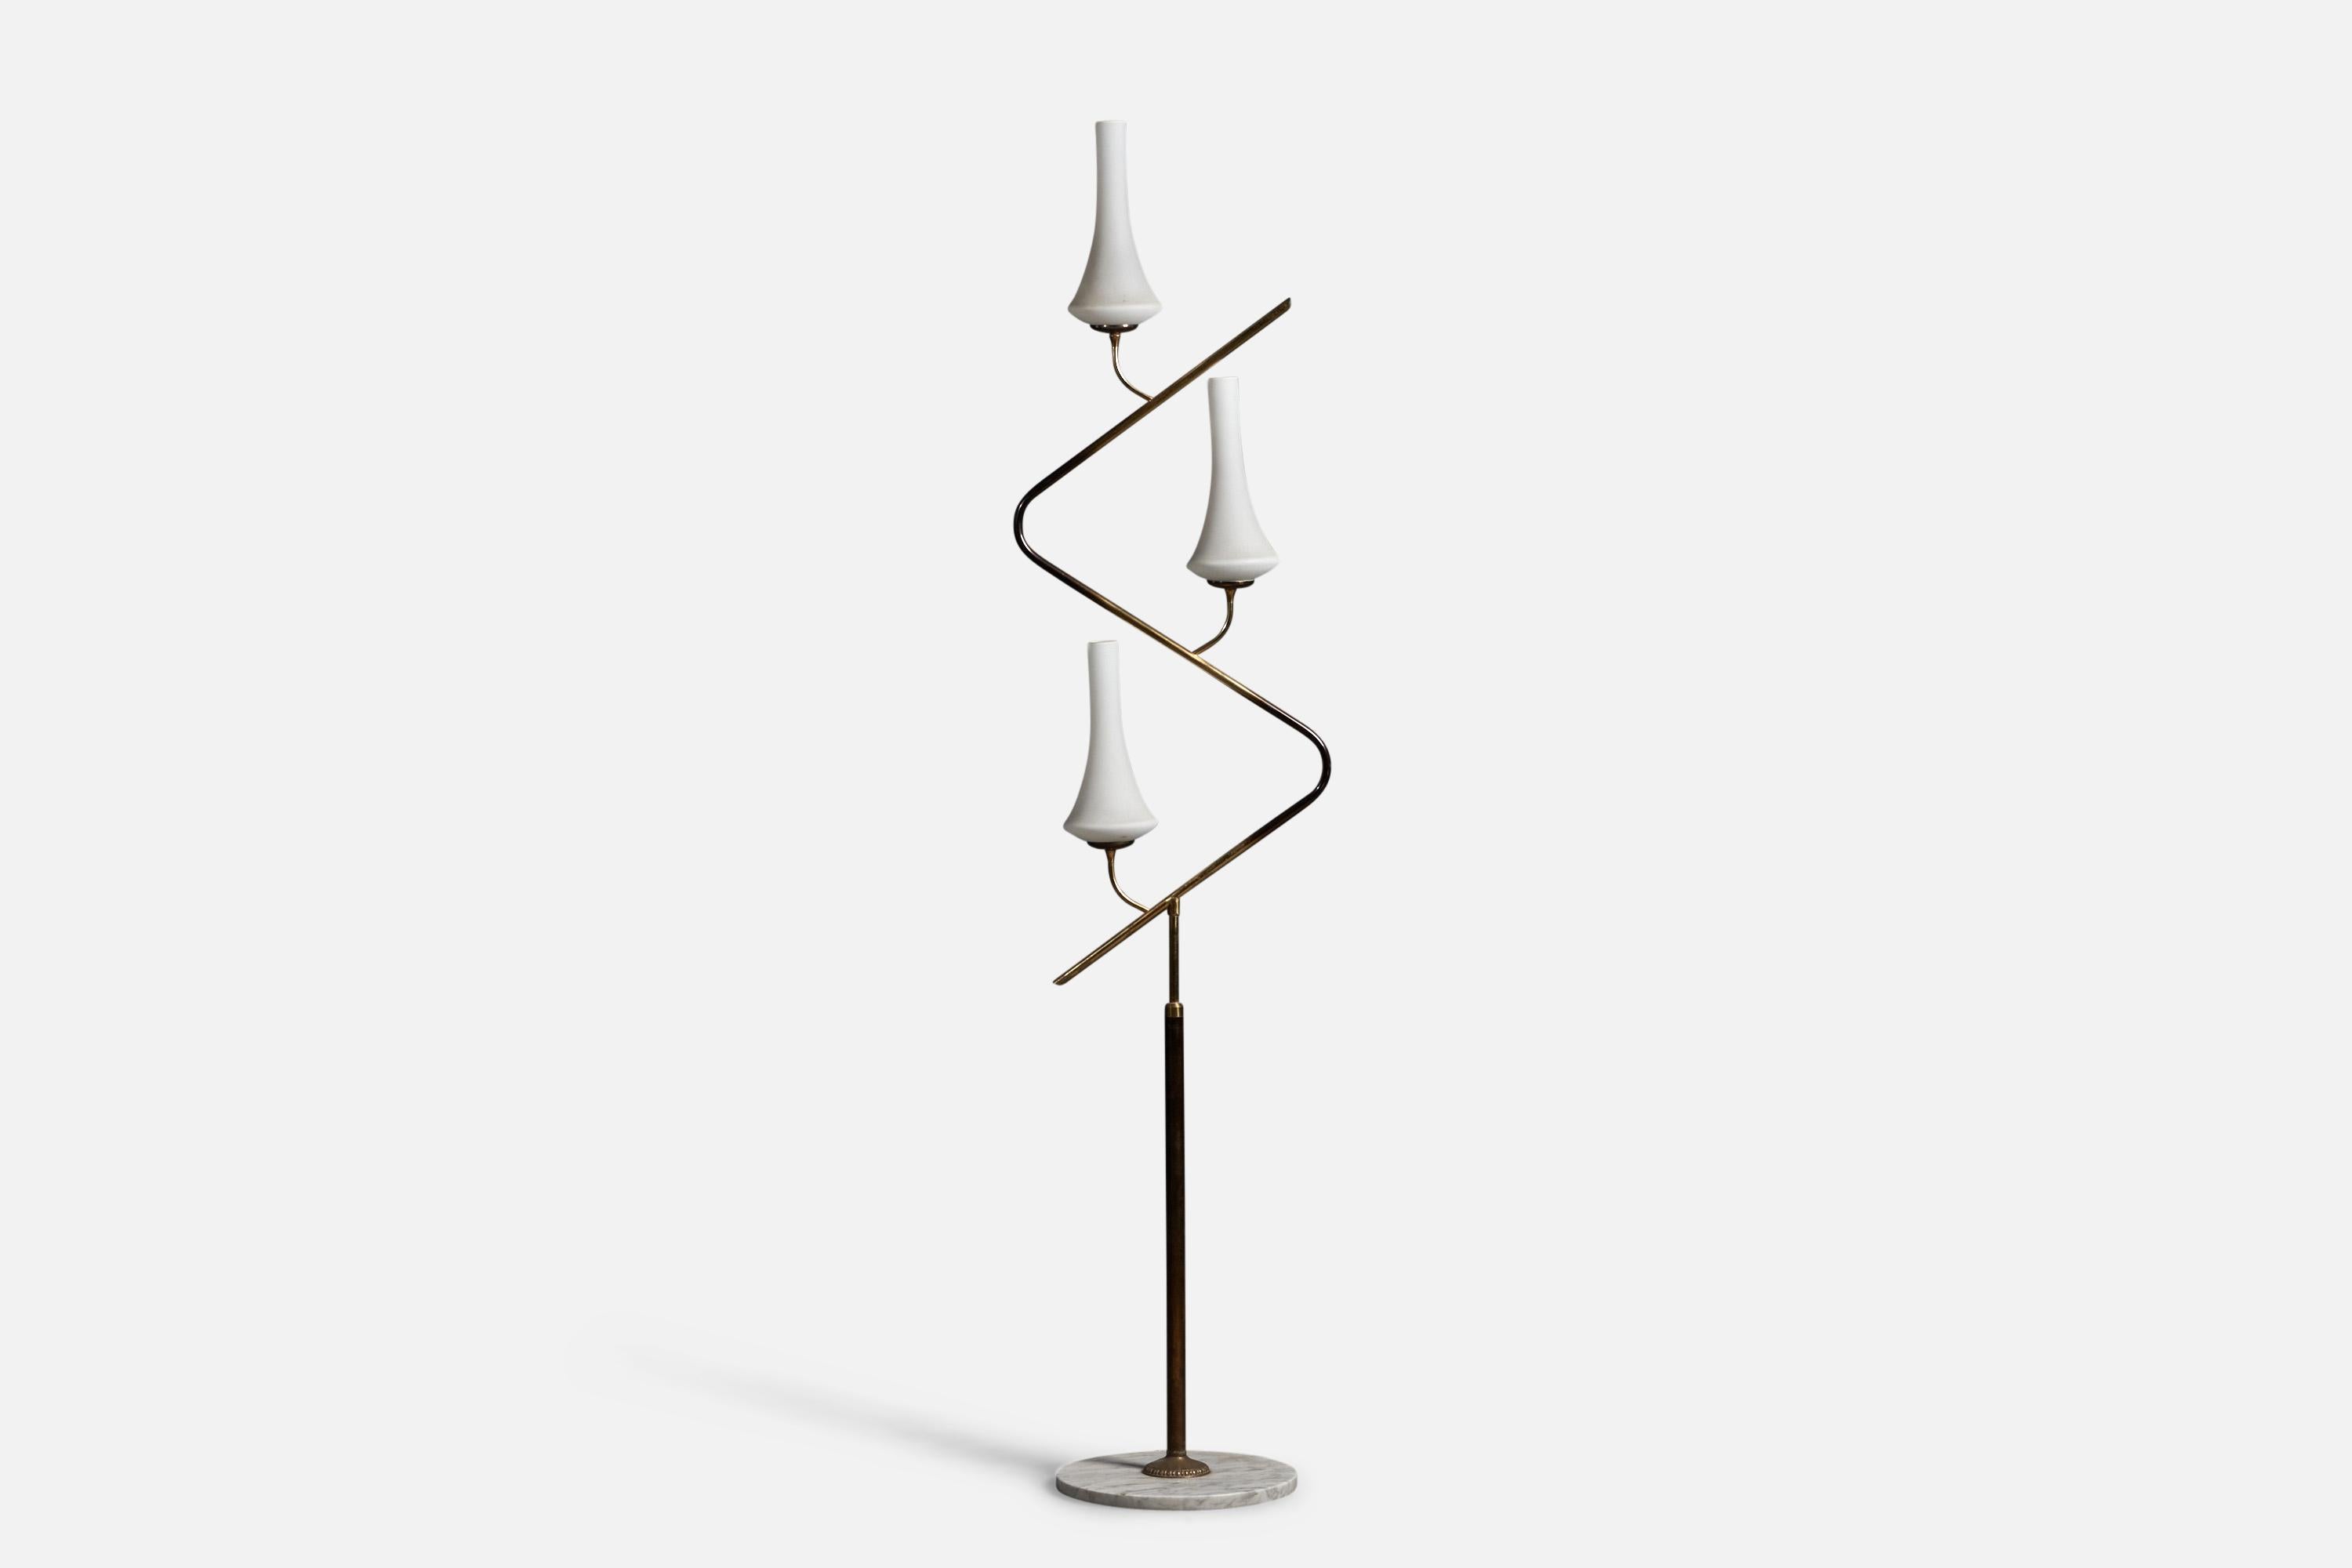 A three-armed brass, metal, marble and glass floor lamp, designed and produced by Stilnovo, Italy c. 1950s.

Overall Dimensions: 67